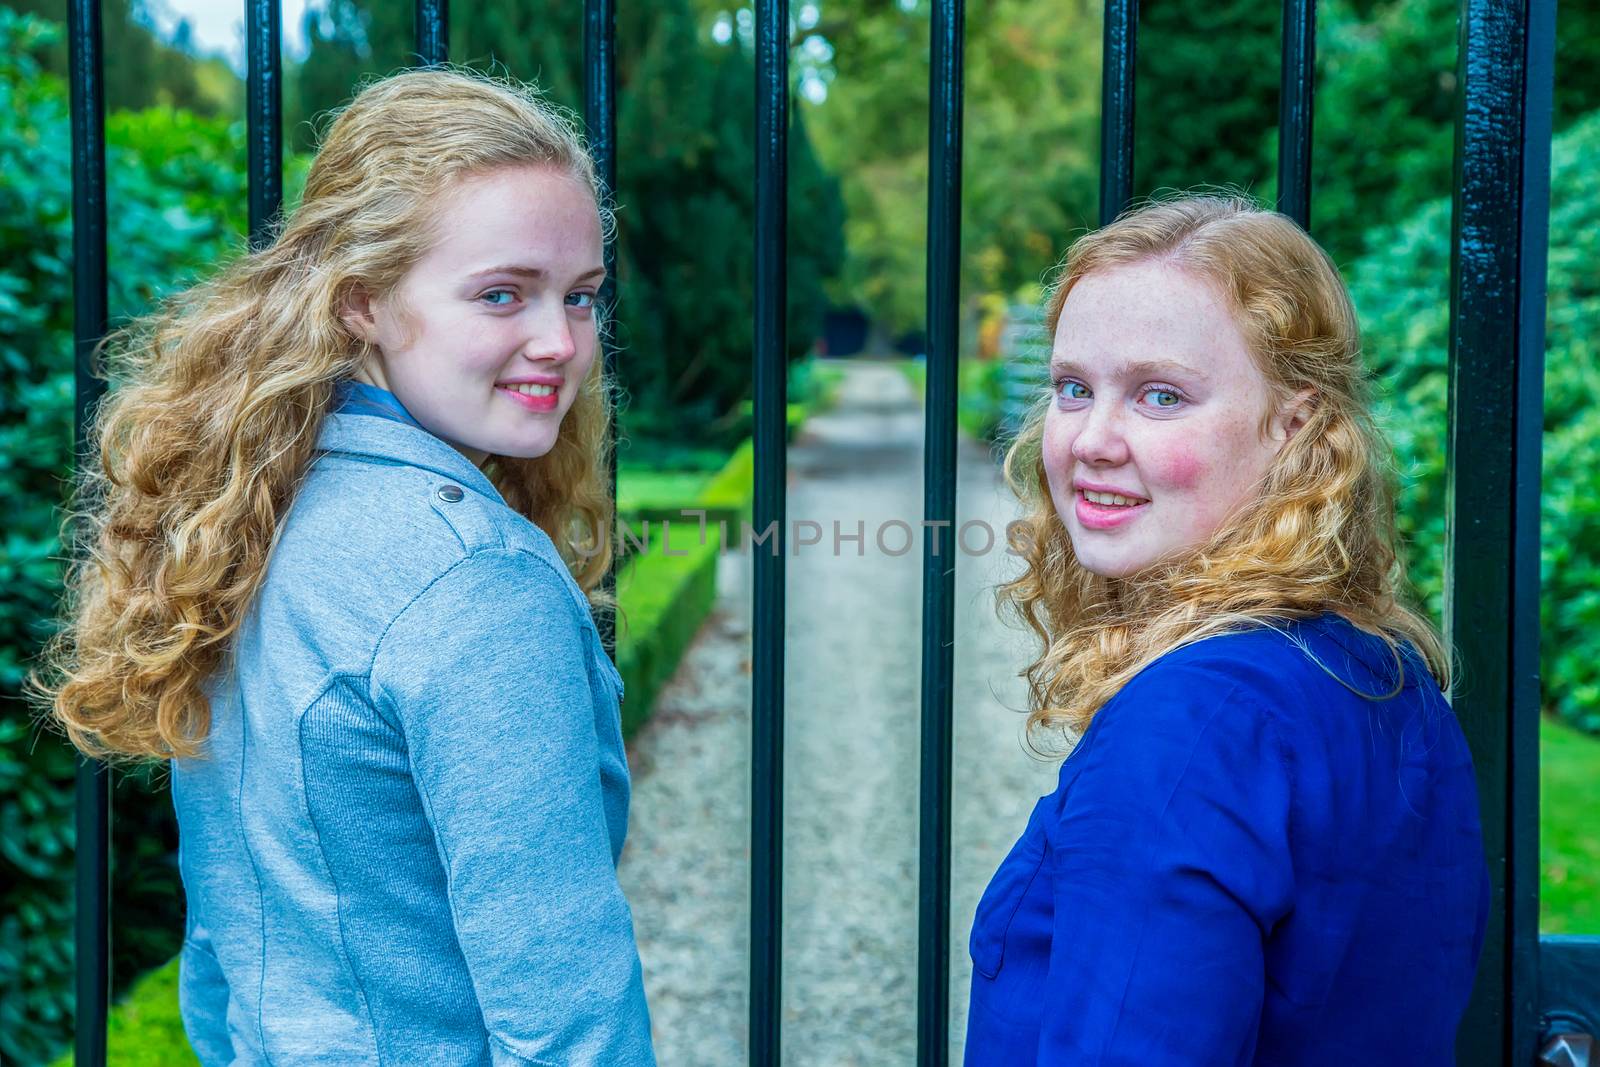 Two girls at fence of garden by BenSchonewille